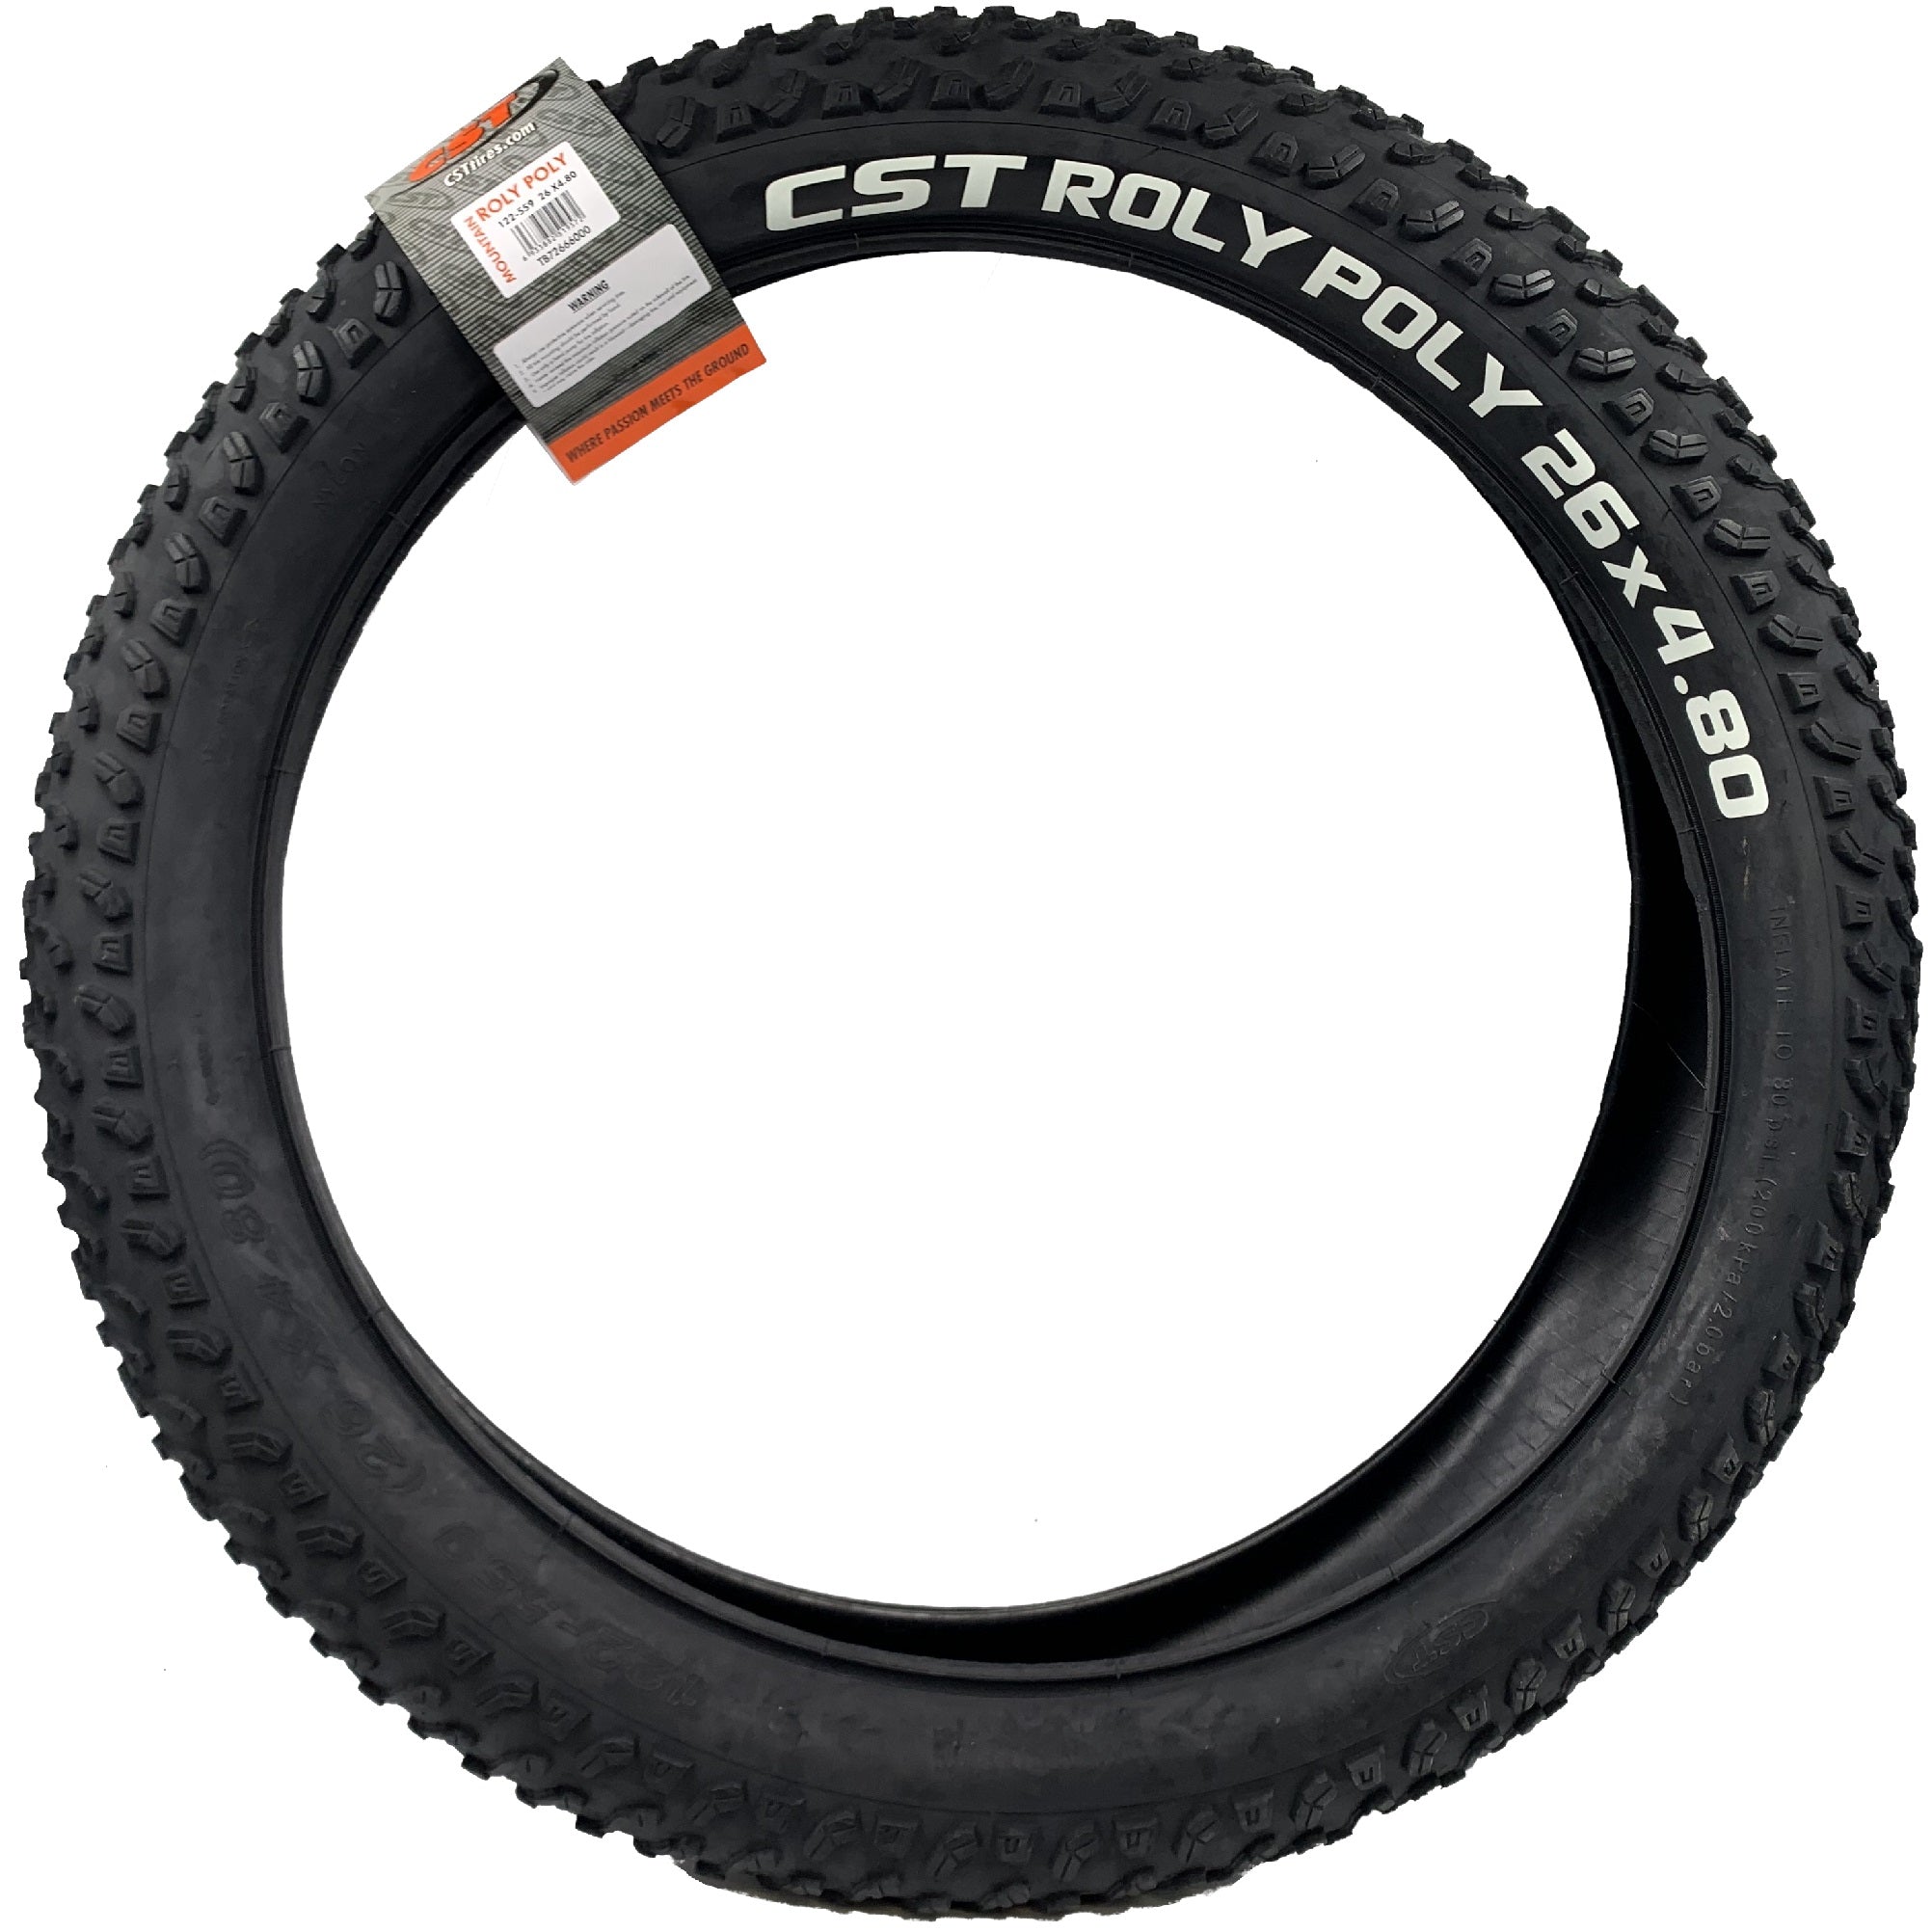 CST Roly Poly 26x4.80 fat bike tire.  Photo shows the side of the tire.